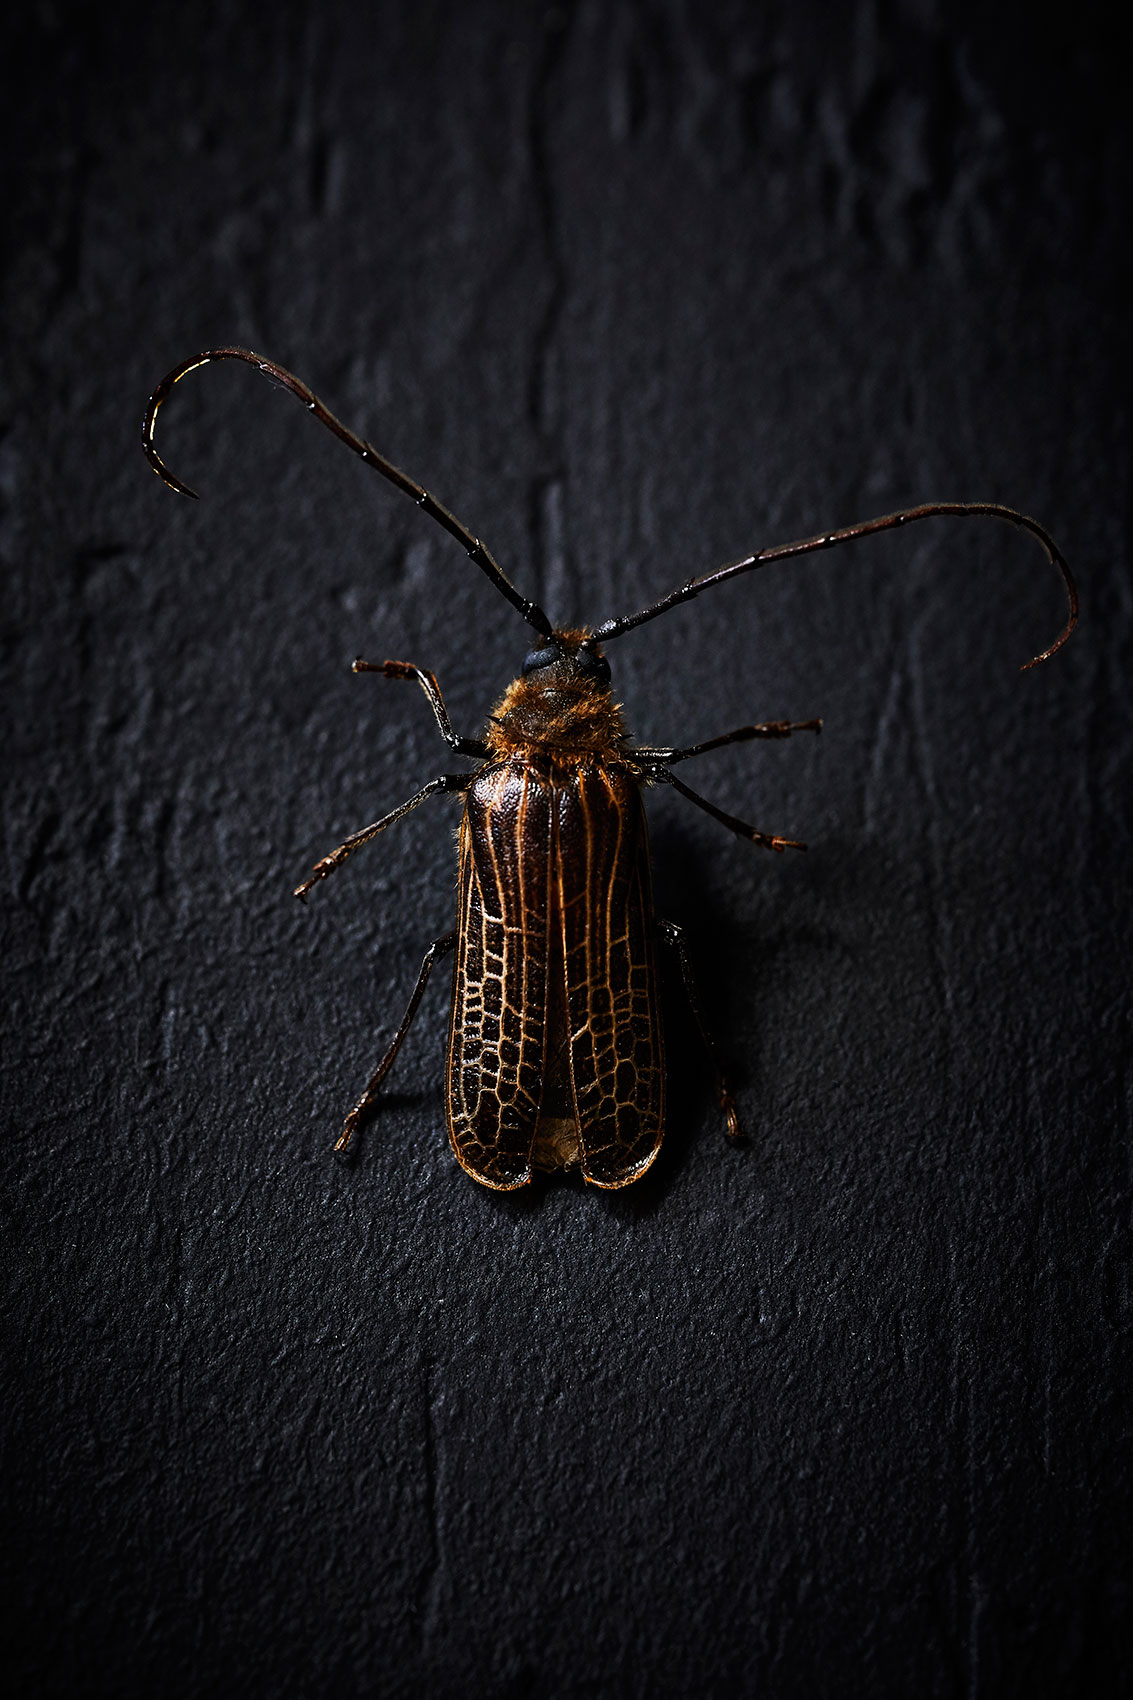 The Bug Project • New Zealand Huhu Beetle with Cellular Wing Pattern • Advertising & Fine Art